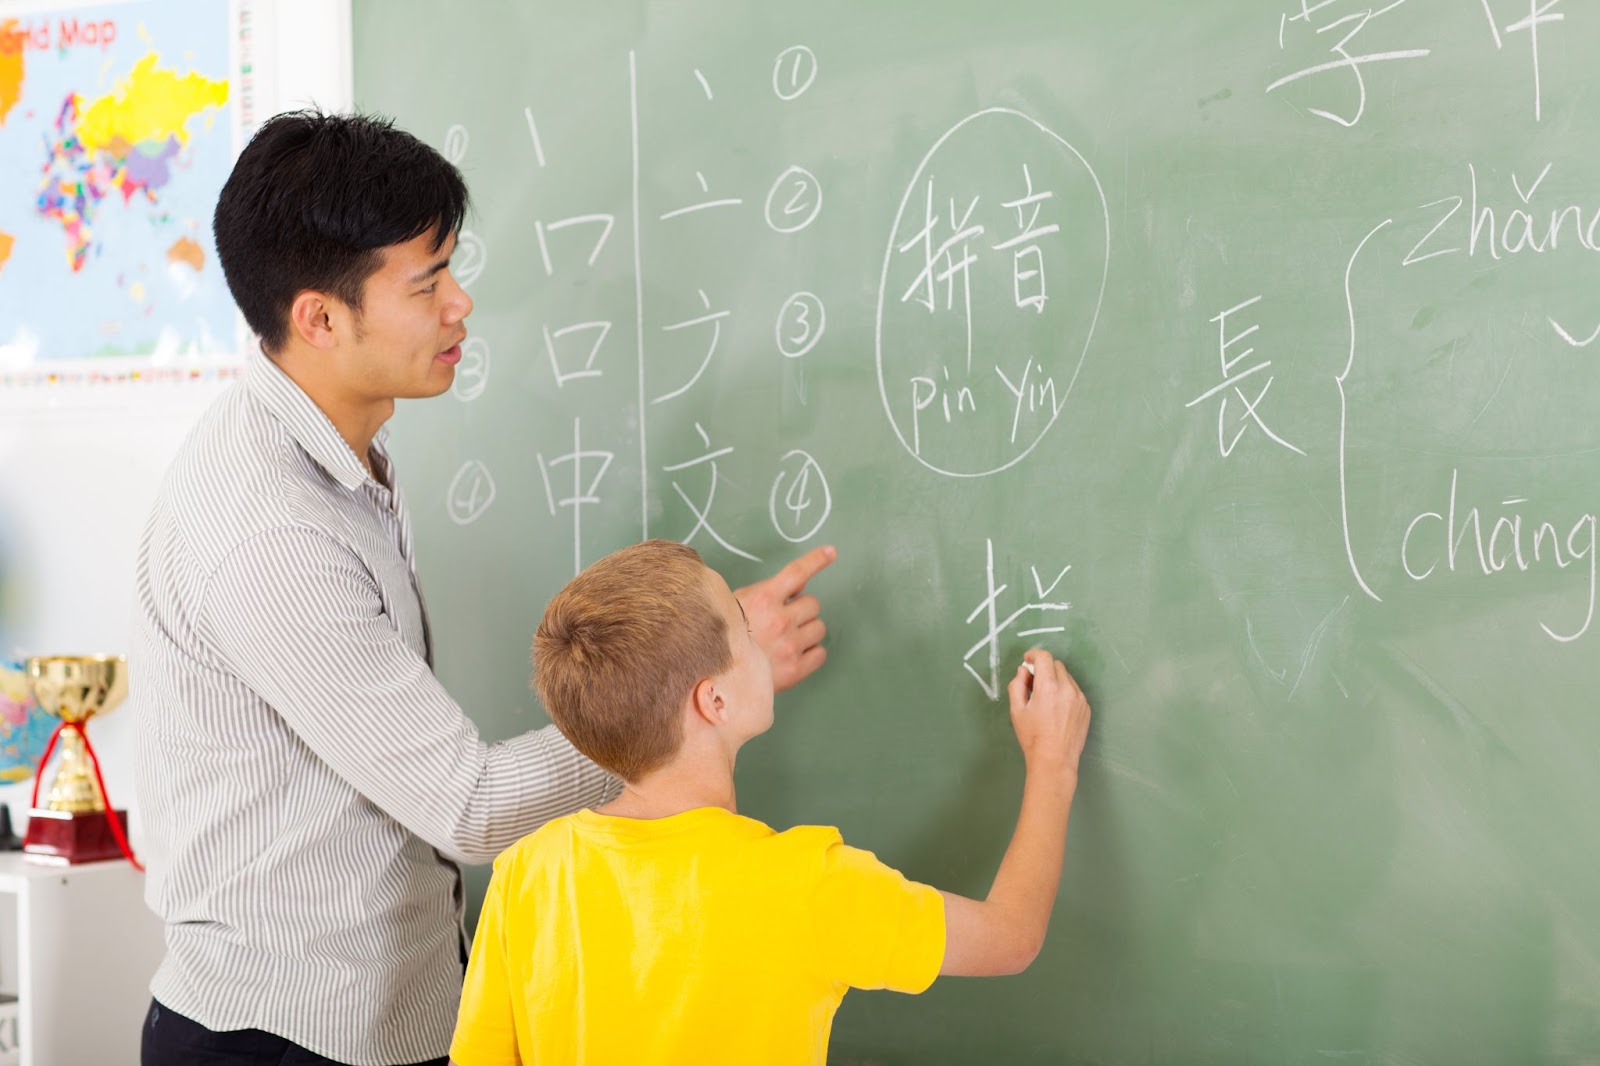 A male teacher teaching a young boy to write Chinese on the board.